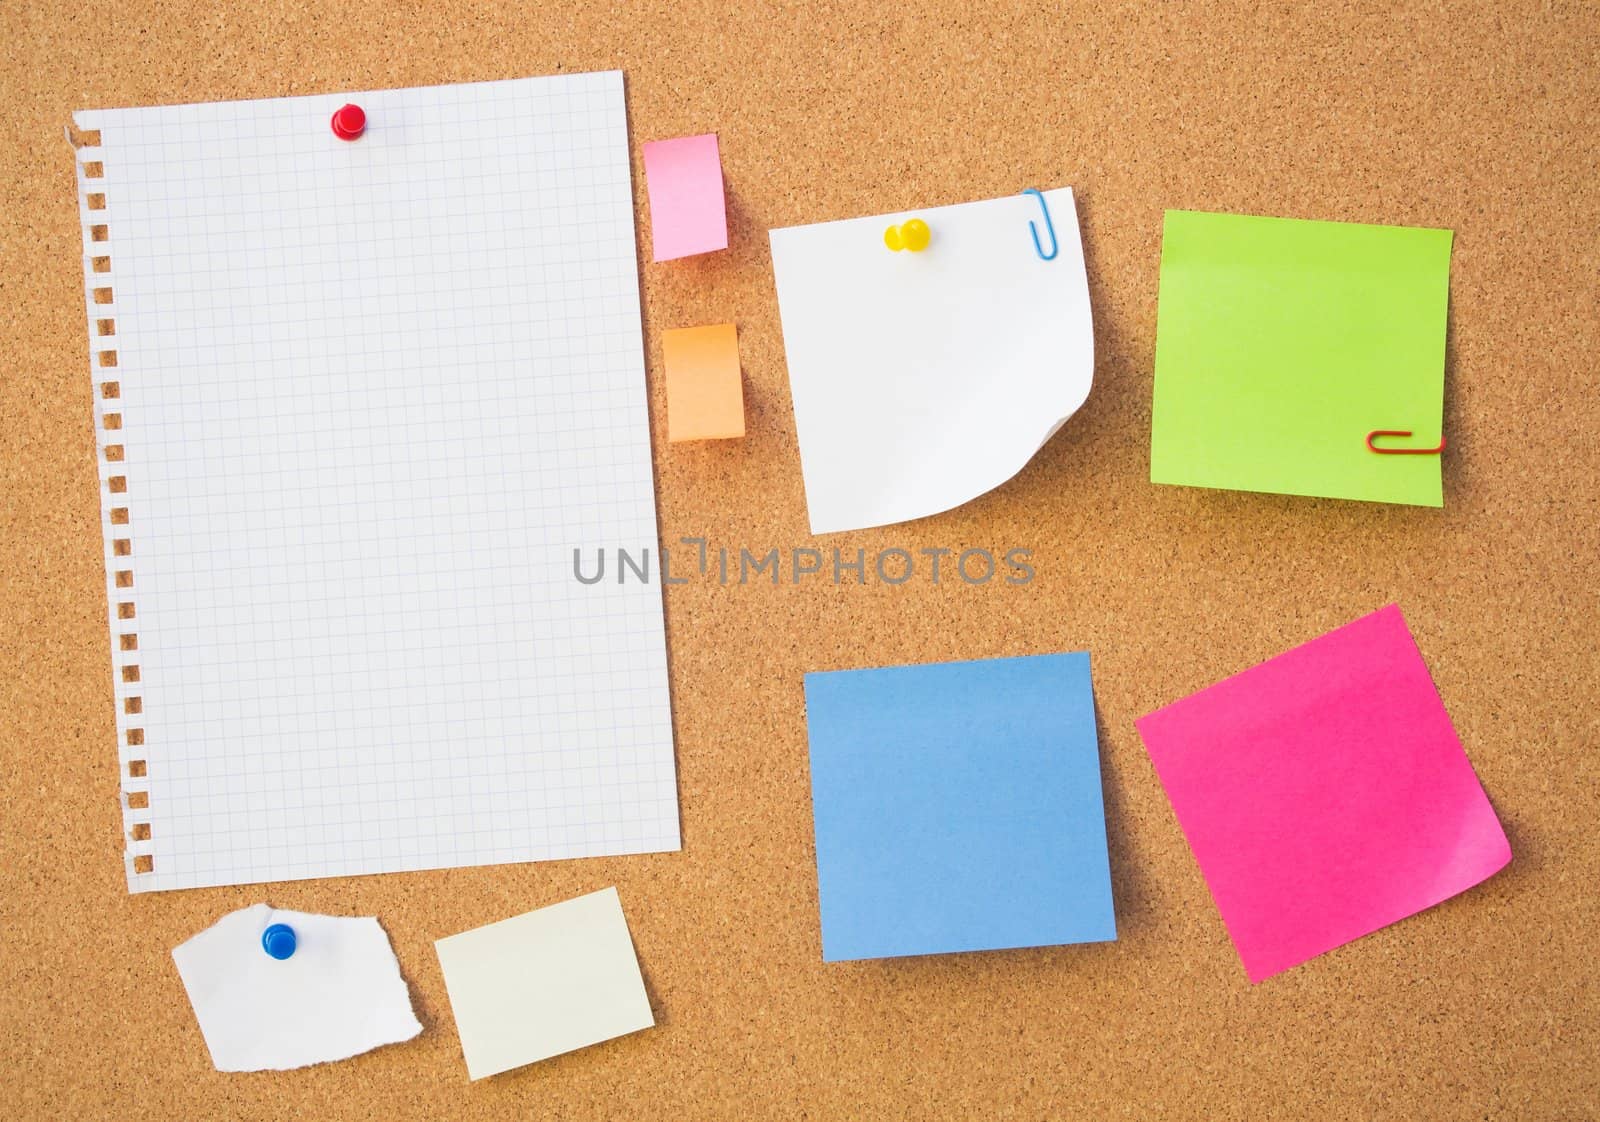 Colour note papers on pin board. Cork background 